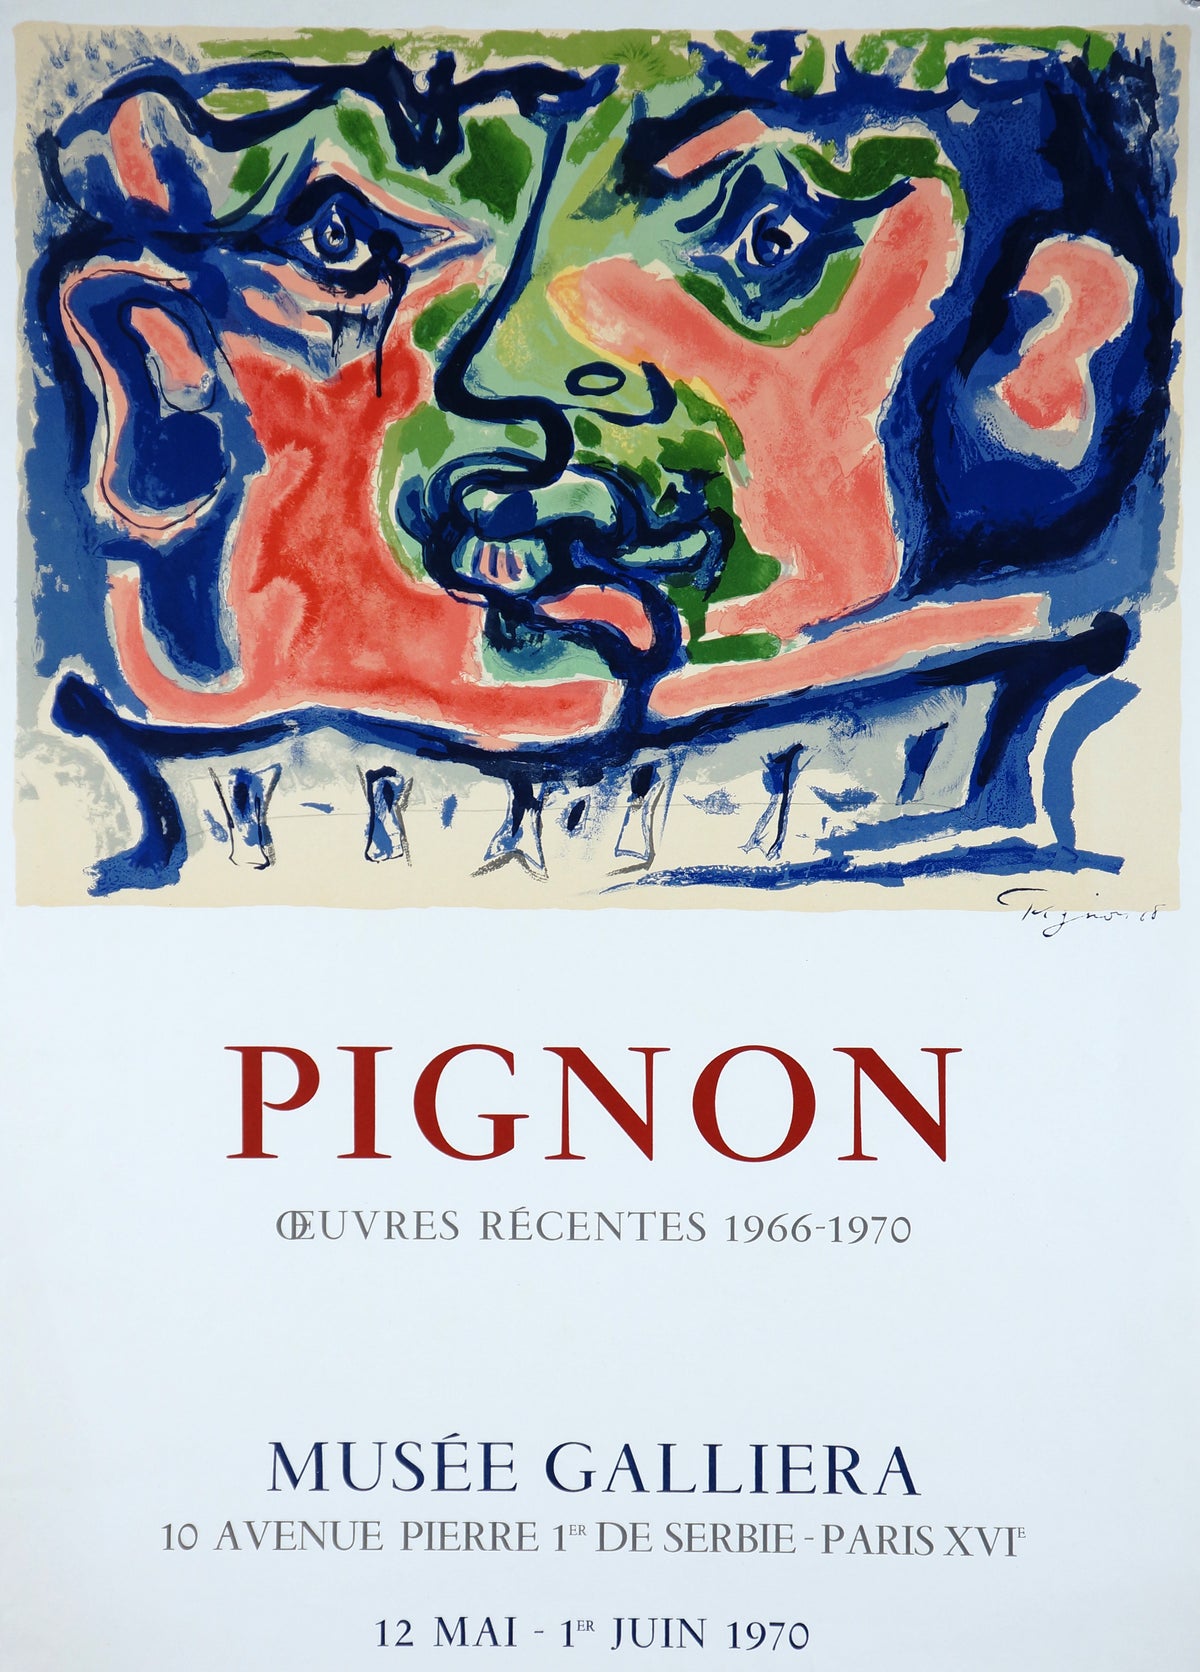 Pignon, Musee Galliera - Authentic Vintage Poster